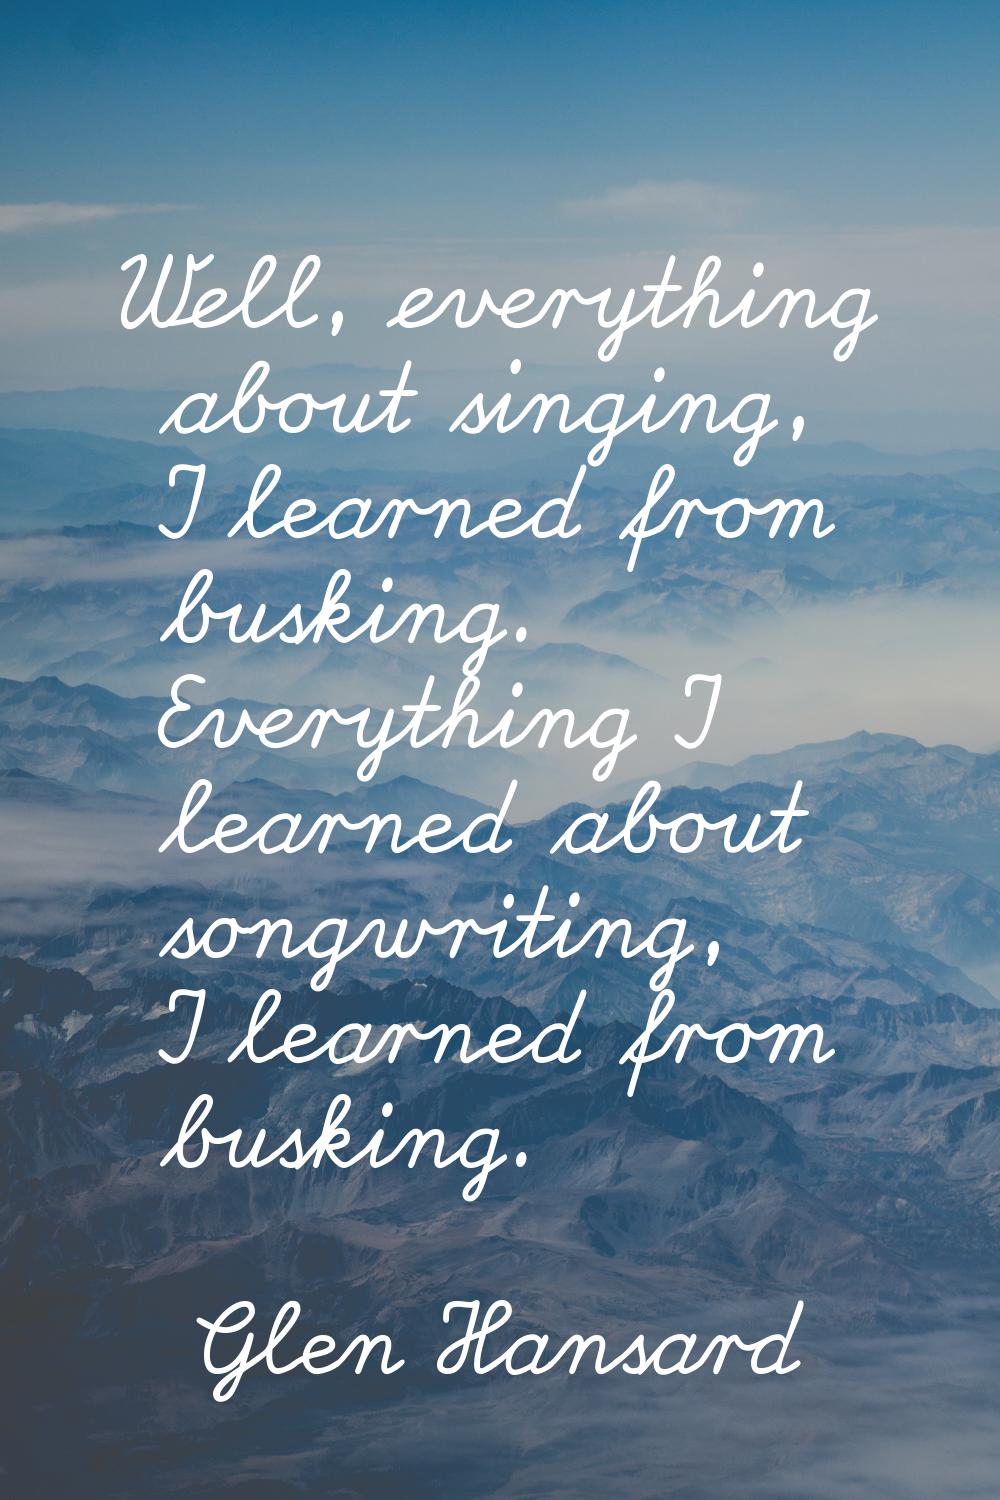 Well, everything about singing, I learned from busking. Everything I learned about songwriting, I l